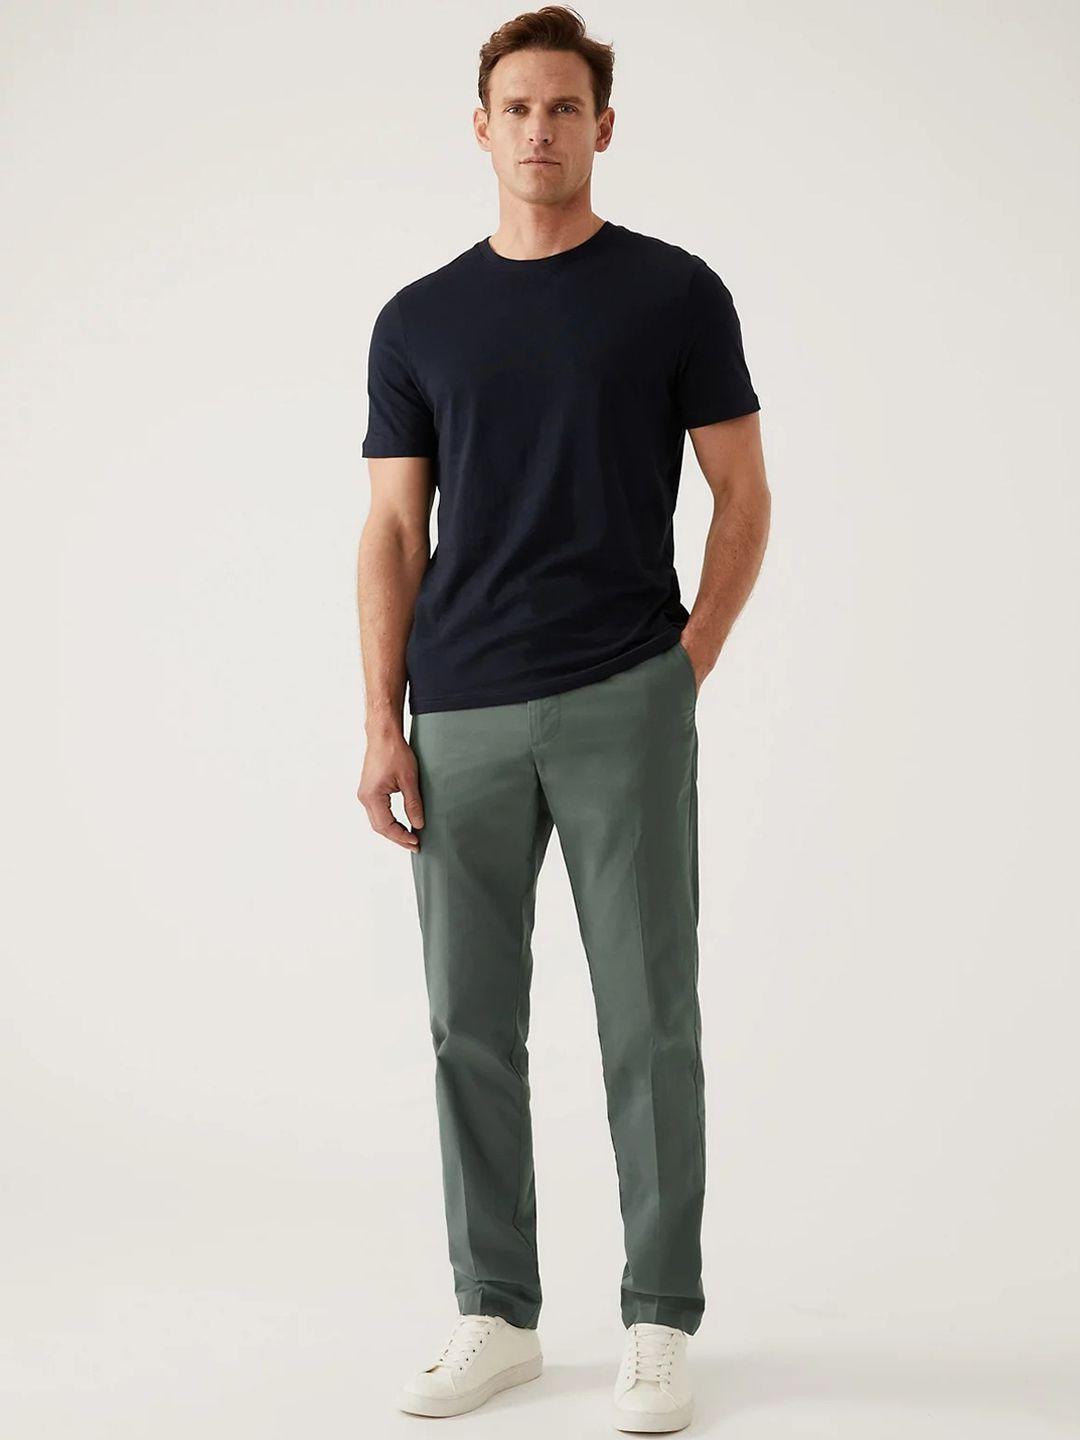 marks-&-spencer-men-mid-rise-chinos-trousers